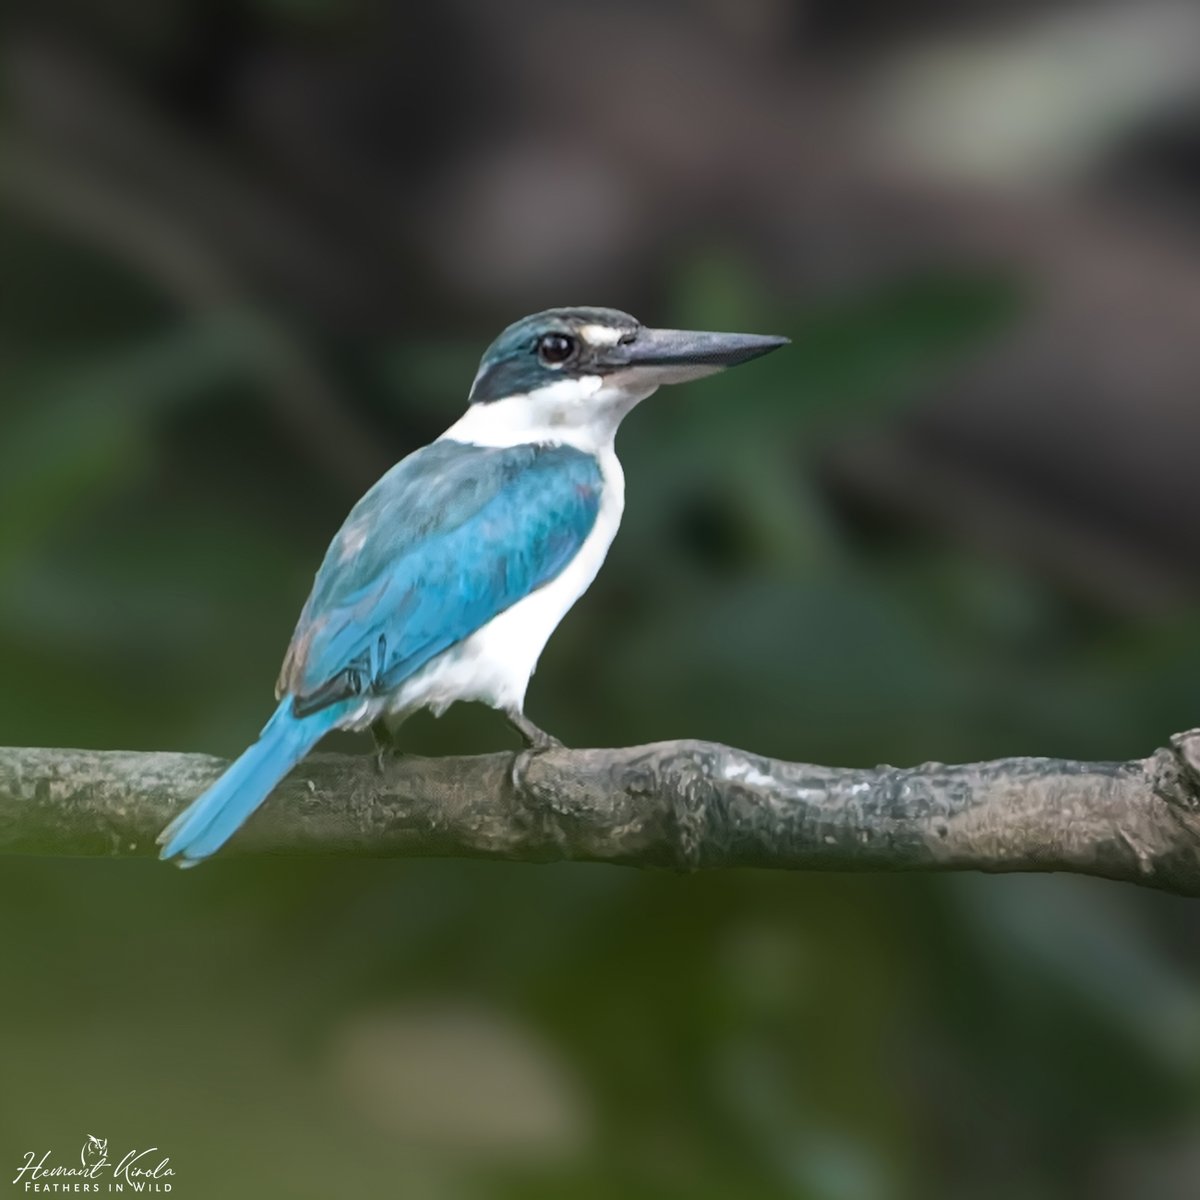 Today's special 'Aerial Fishing' bills/beak' (Bill which is uses to catch fish in a diving flight into the water from above). Let's fill the X with Aerial Fishing bill birds. Collared Kingfisher #IndiAves #ThePhotoHour #AerialFishingBills